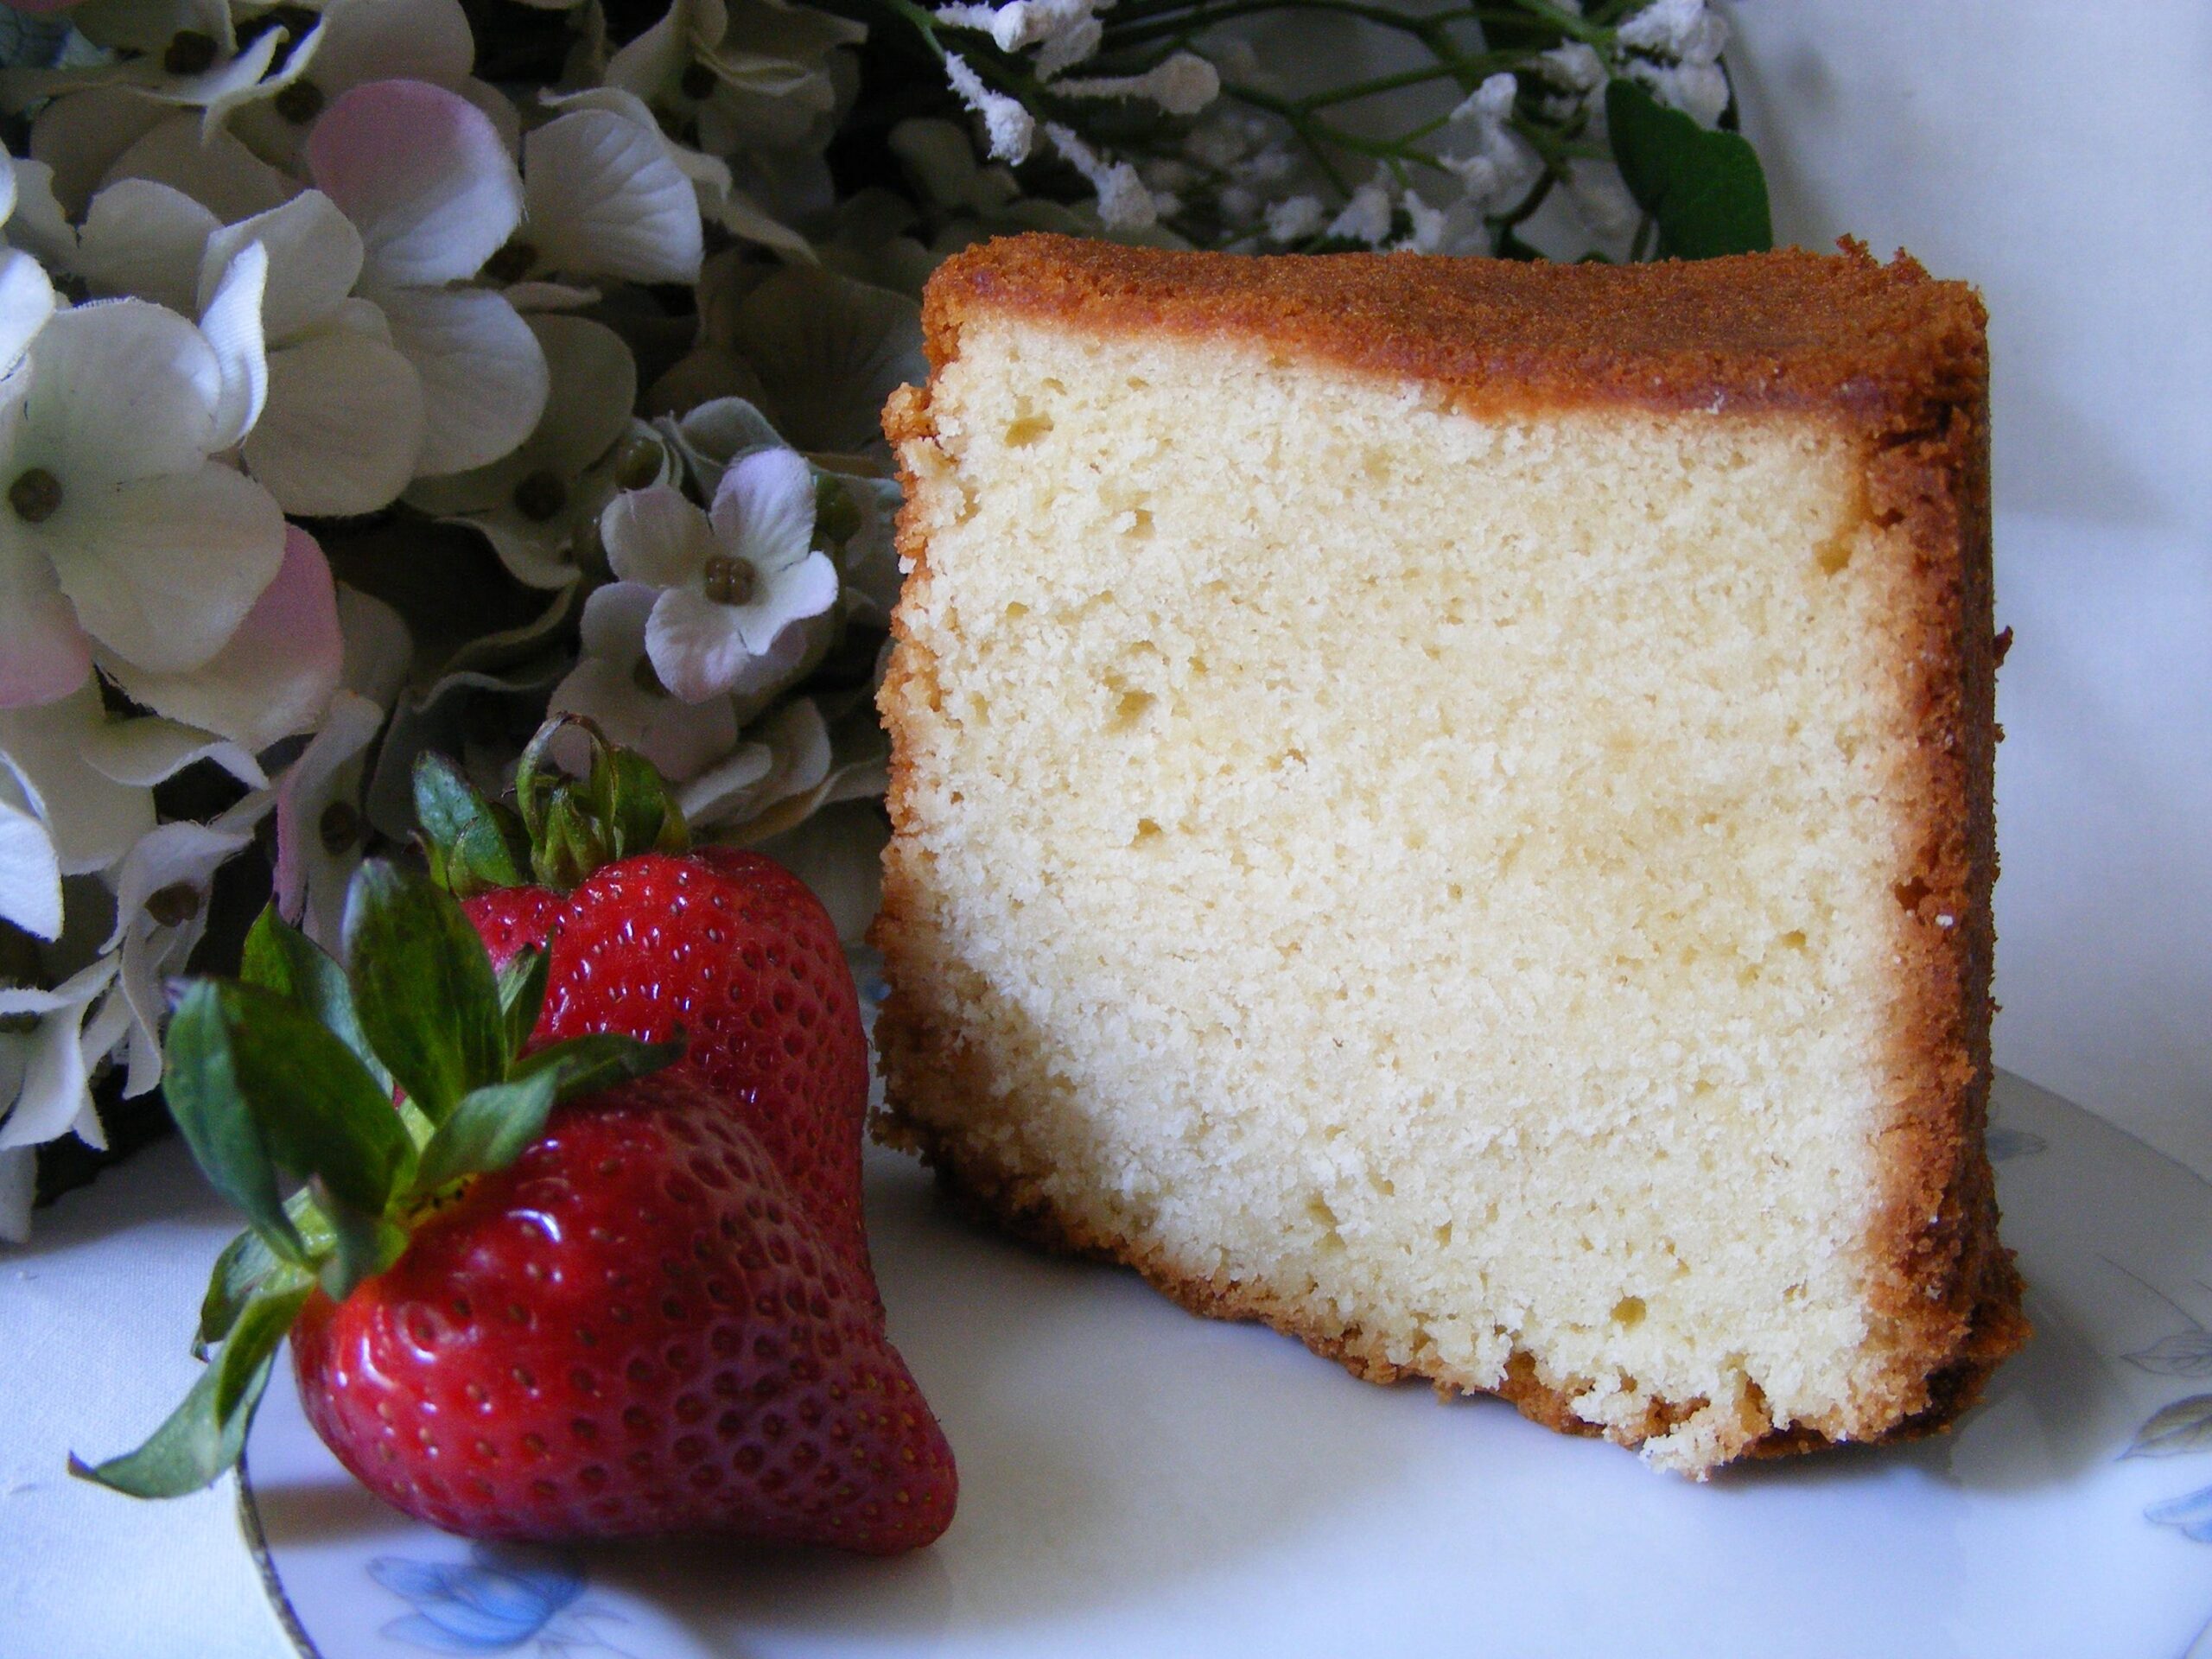  Nothing pairs better with a warm cup of tea than a slice of Mellow Cream Cheese Pound Cake.